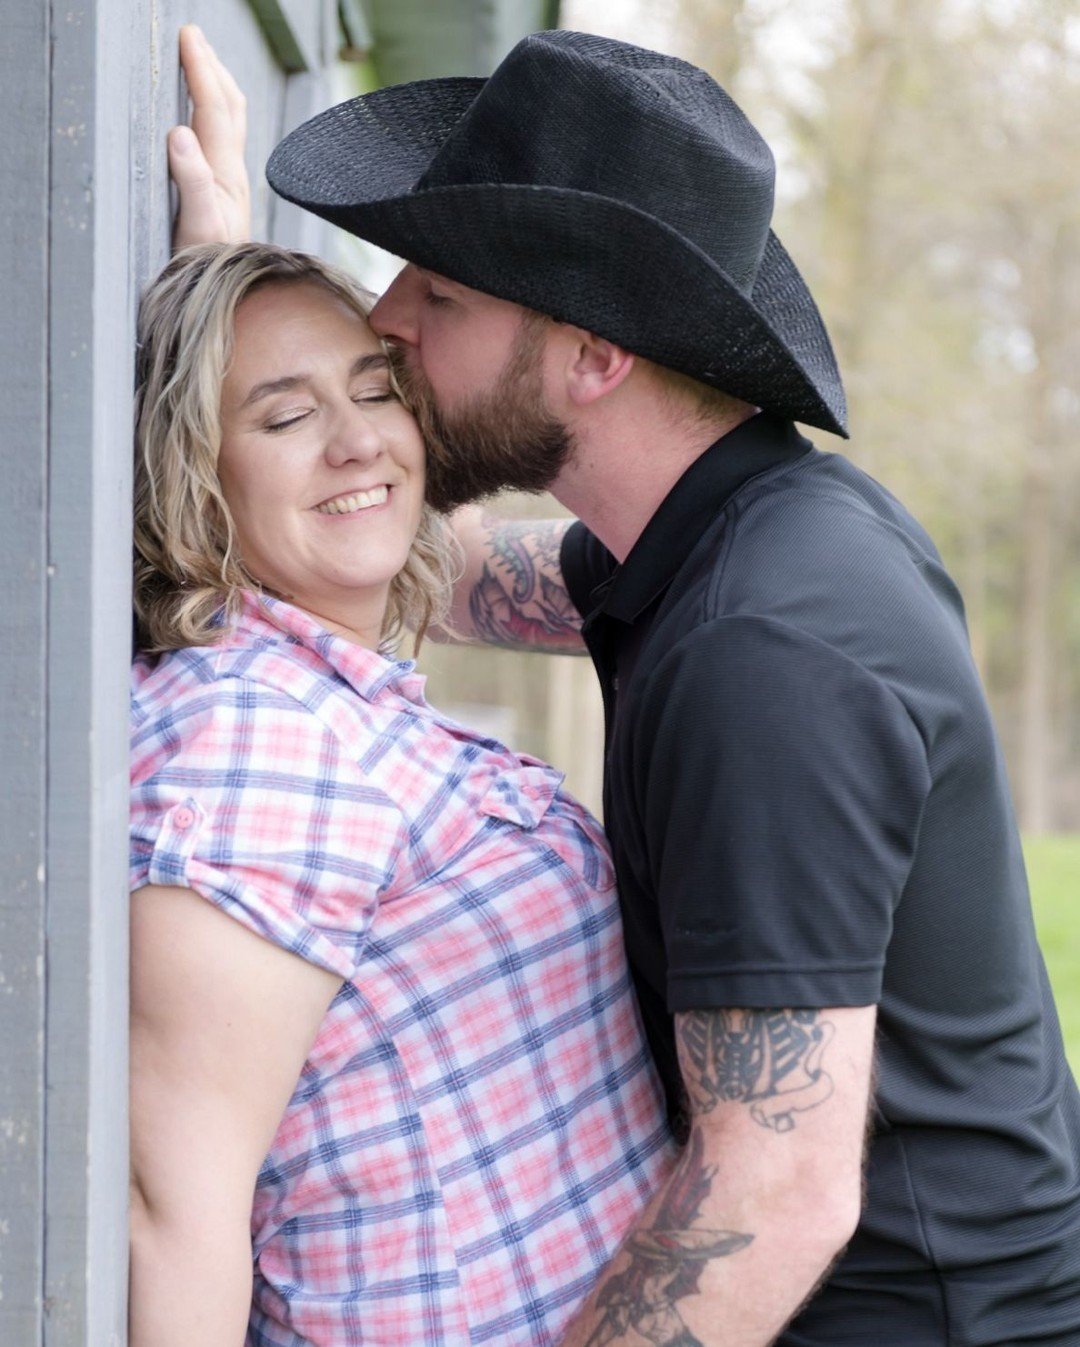 Sneak Peek Time - Had an absolute blast last night with these two lovebirds on their farm inspired engagement sessions. 

Can't wait to have you guys in studio this Thursday to see more of what we created!